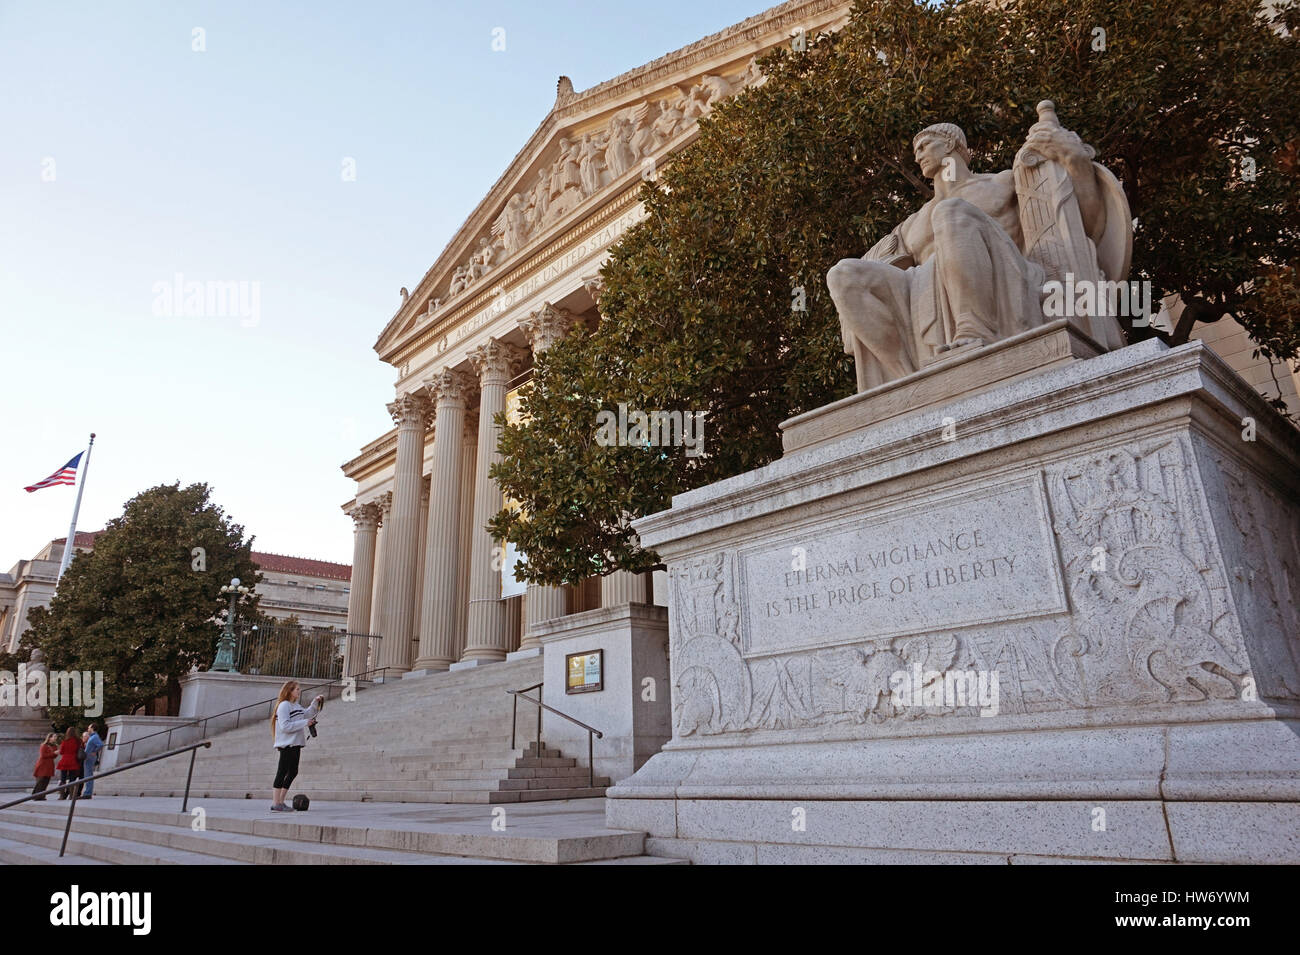 Eternal vigilance is the price of liberty - inscription below a statue outside the National Archives, Washington DC, USA Stock Photo